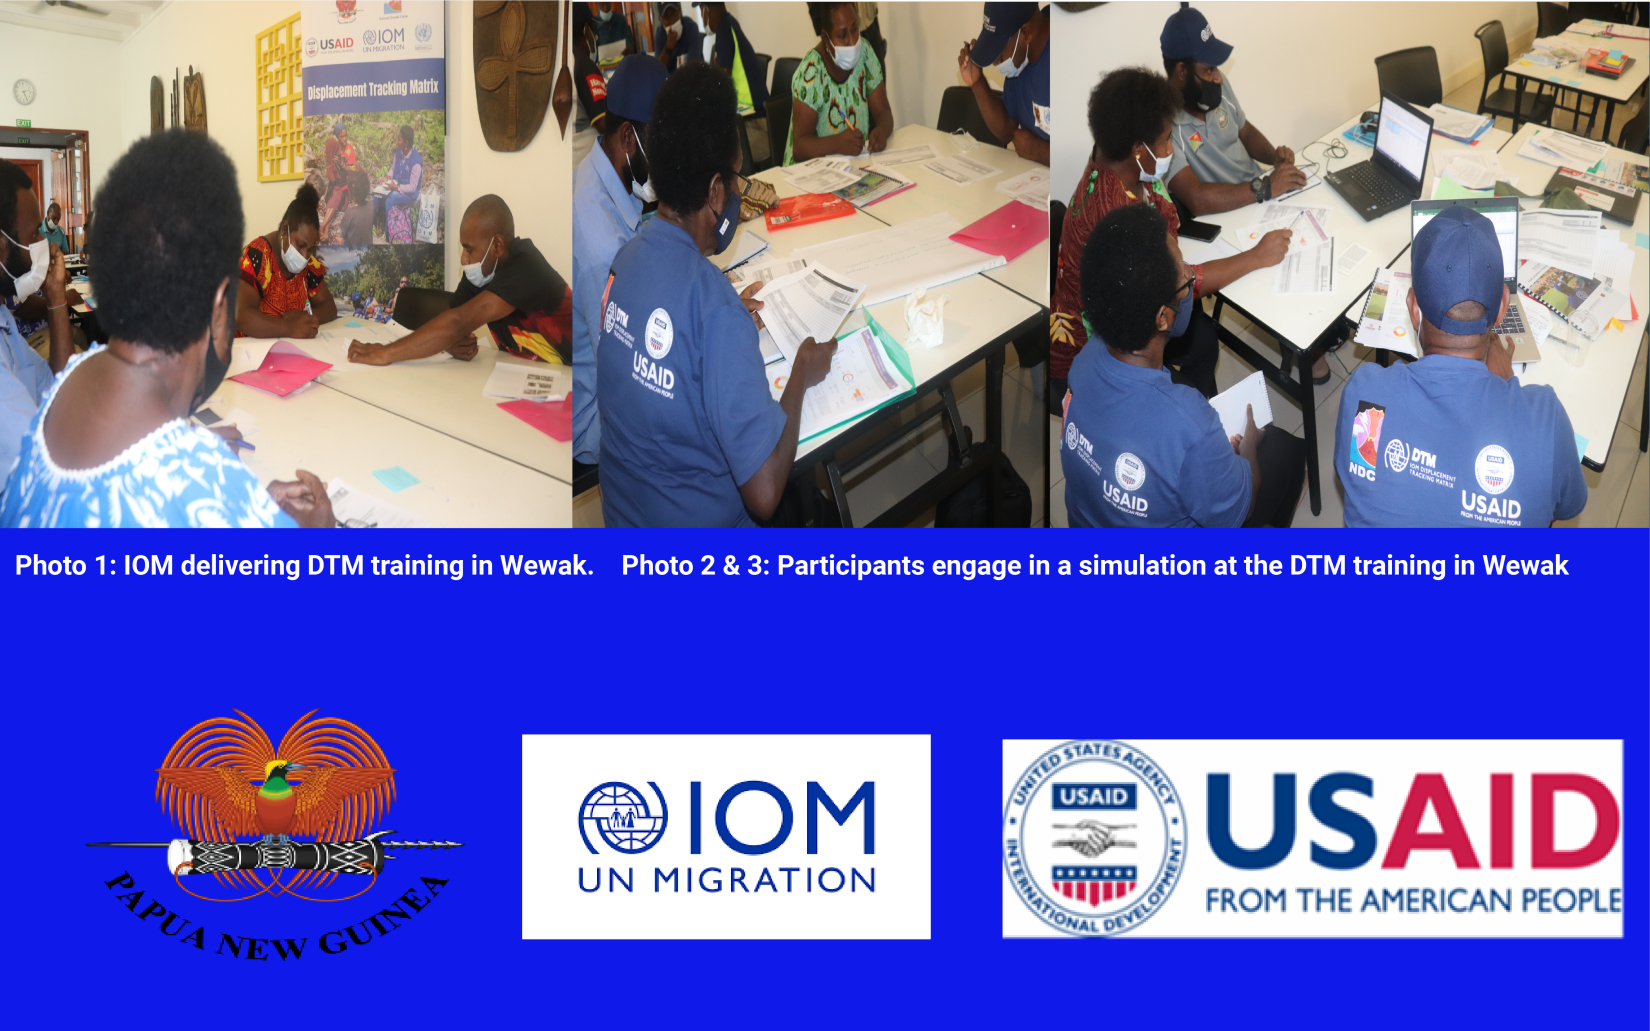 Delivery of DTM training in Wewak and Participants attending group work